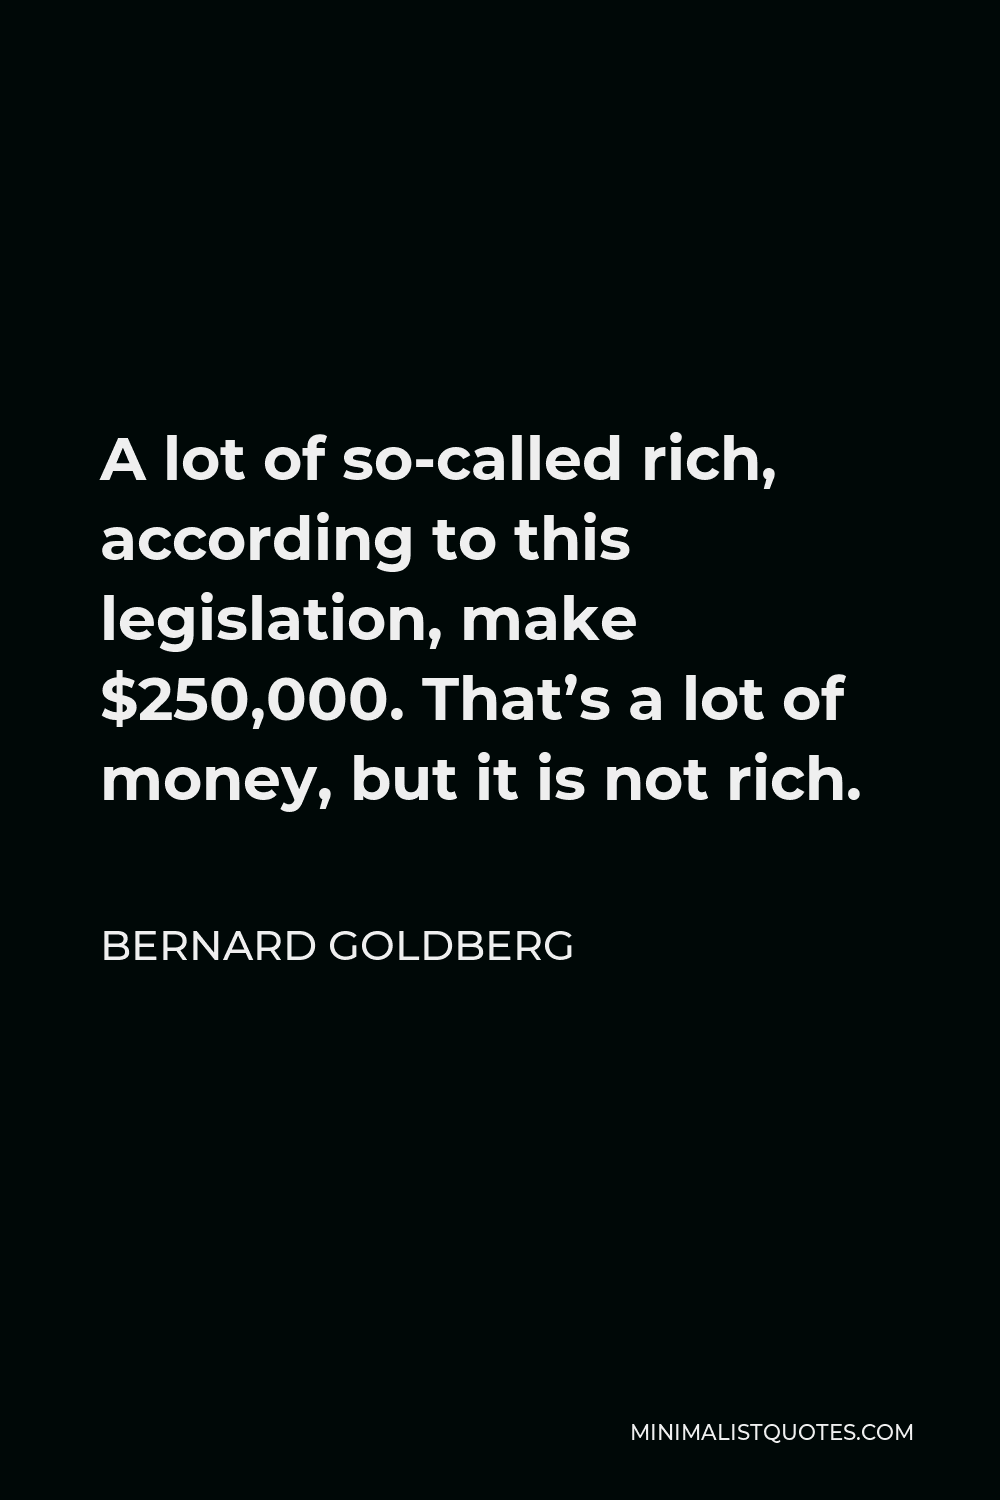 Bernard Goldberg Quote - A lot of so-called rich, according to this legislation, make $250,000. That’s a lot of money, but it is not rich.